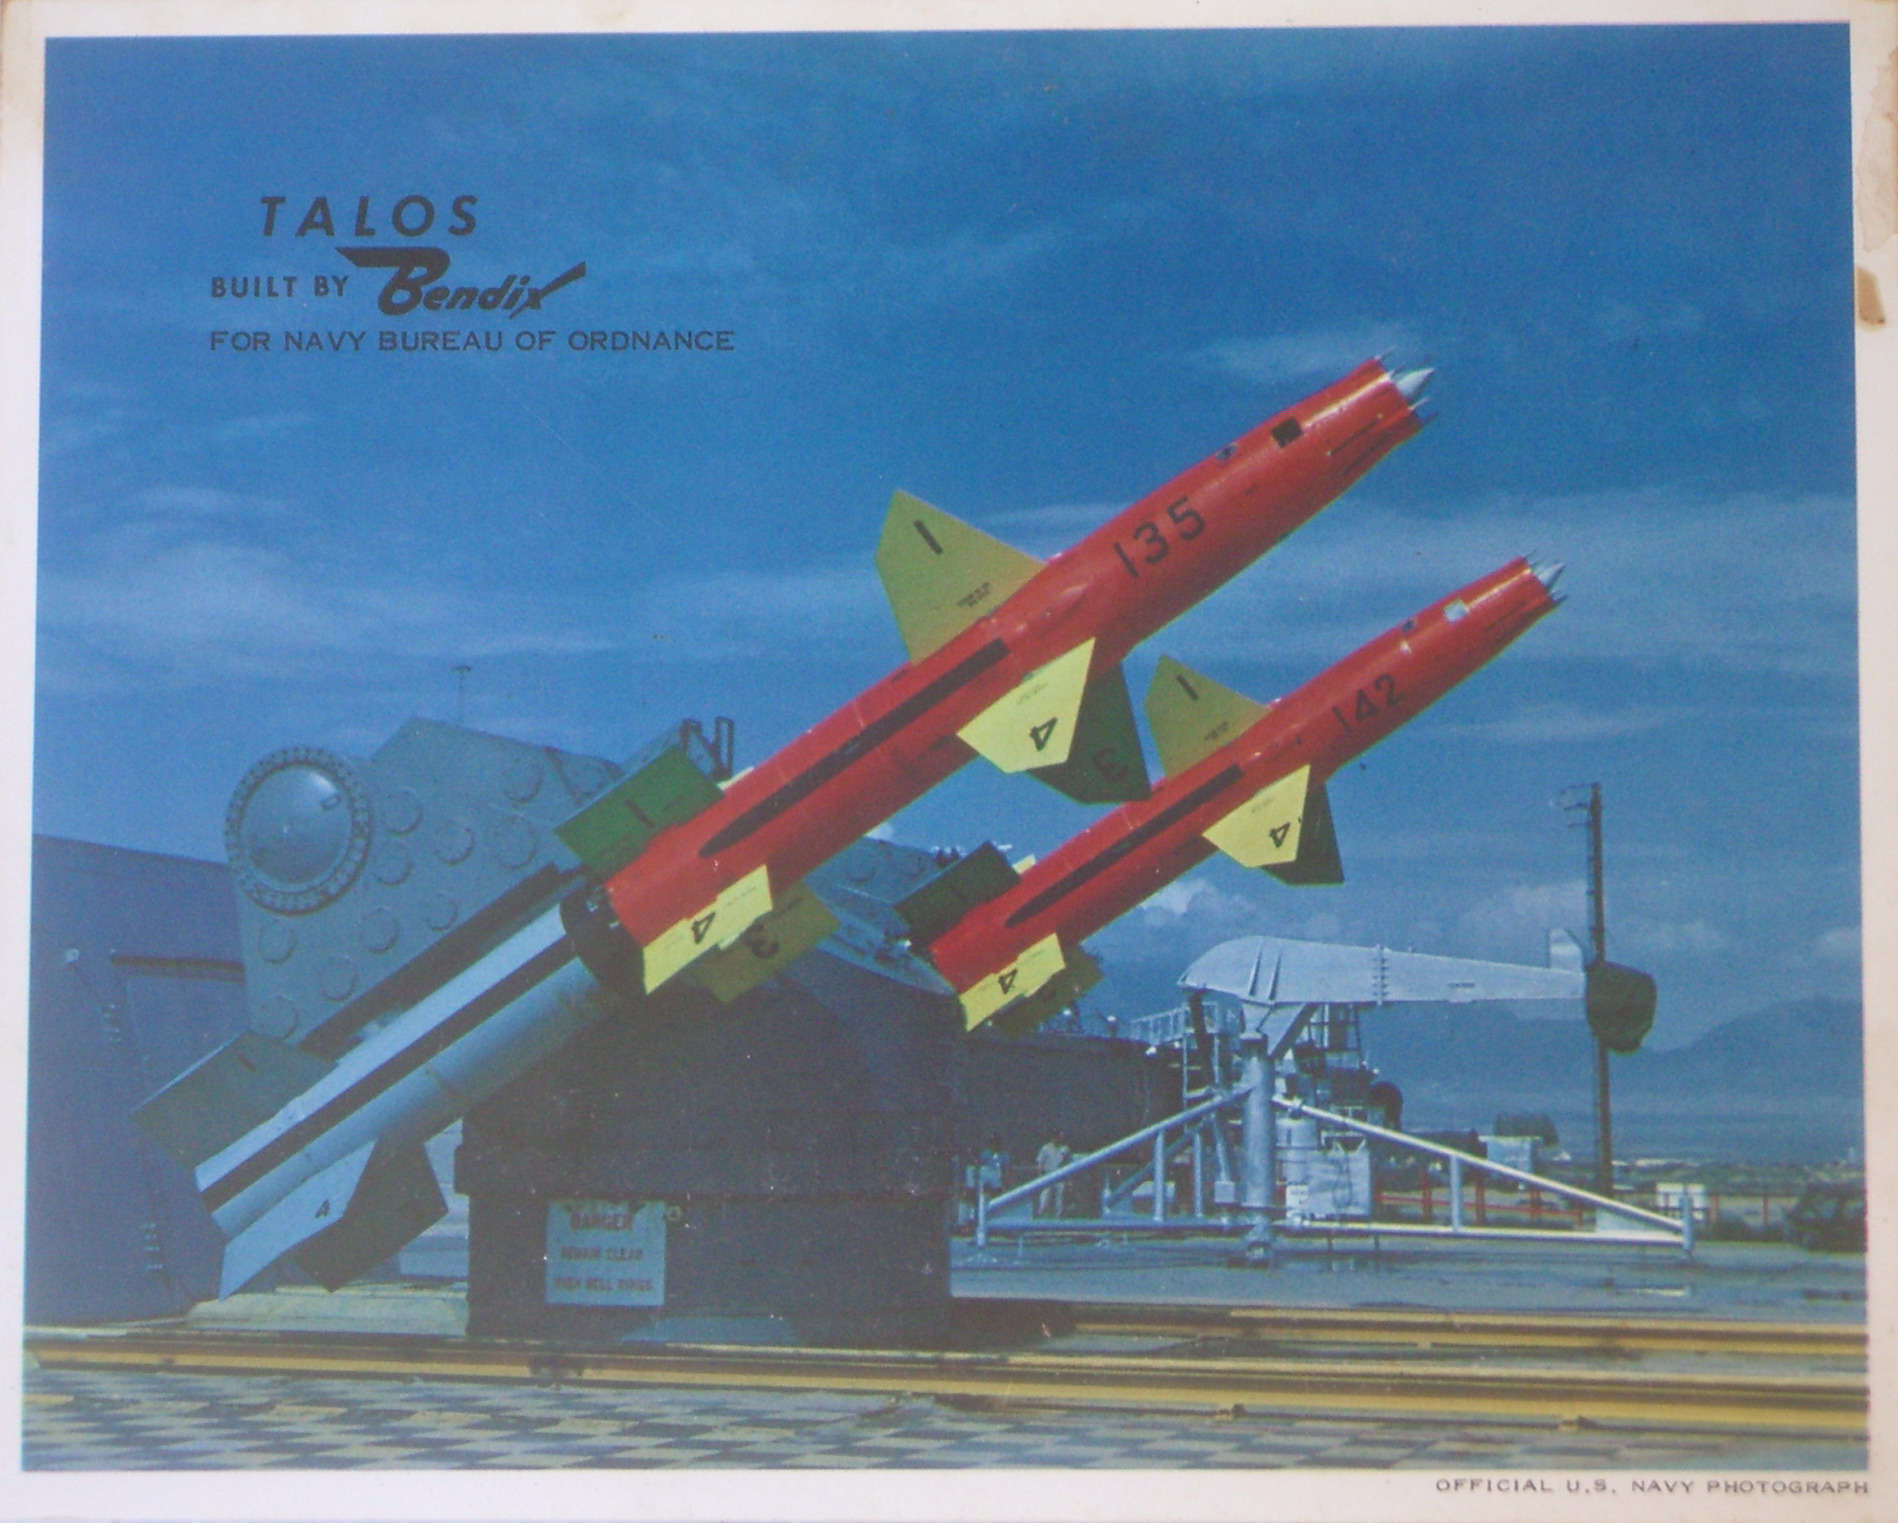 RIM-8 Talos surface to air missile built by Bendix Corporation in test launcher at White Sands Missile Range New Mexico